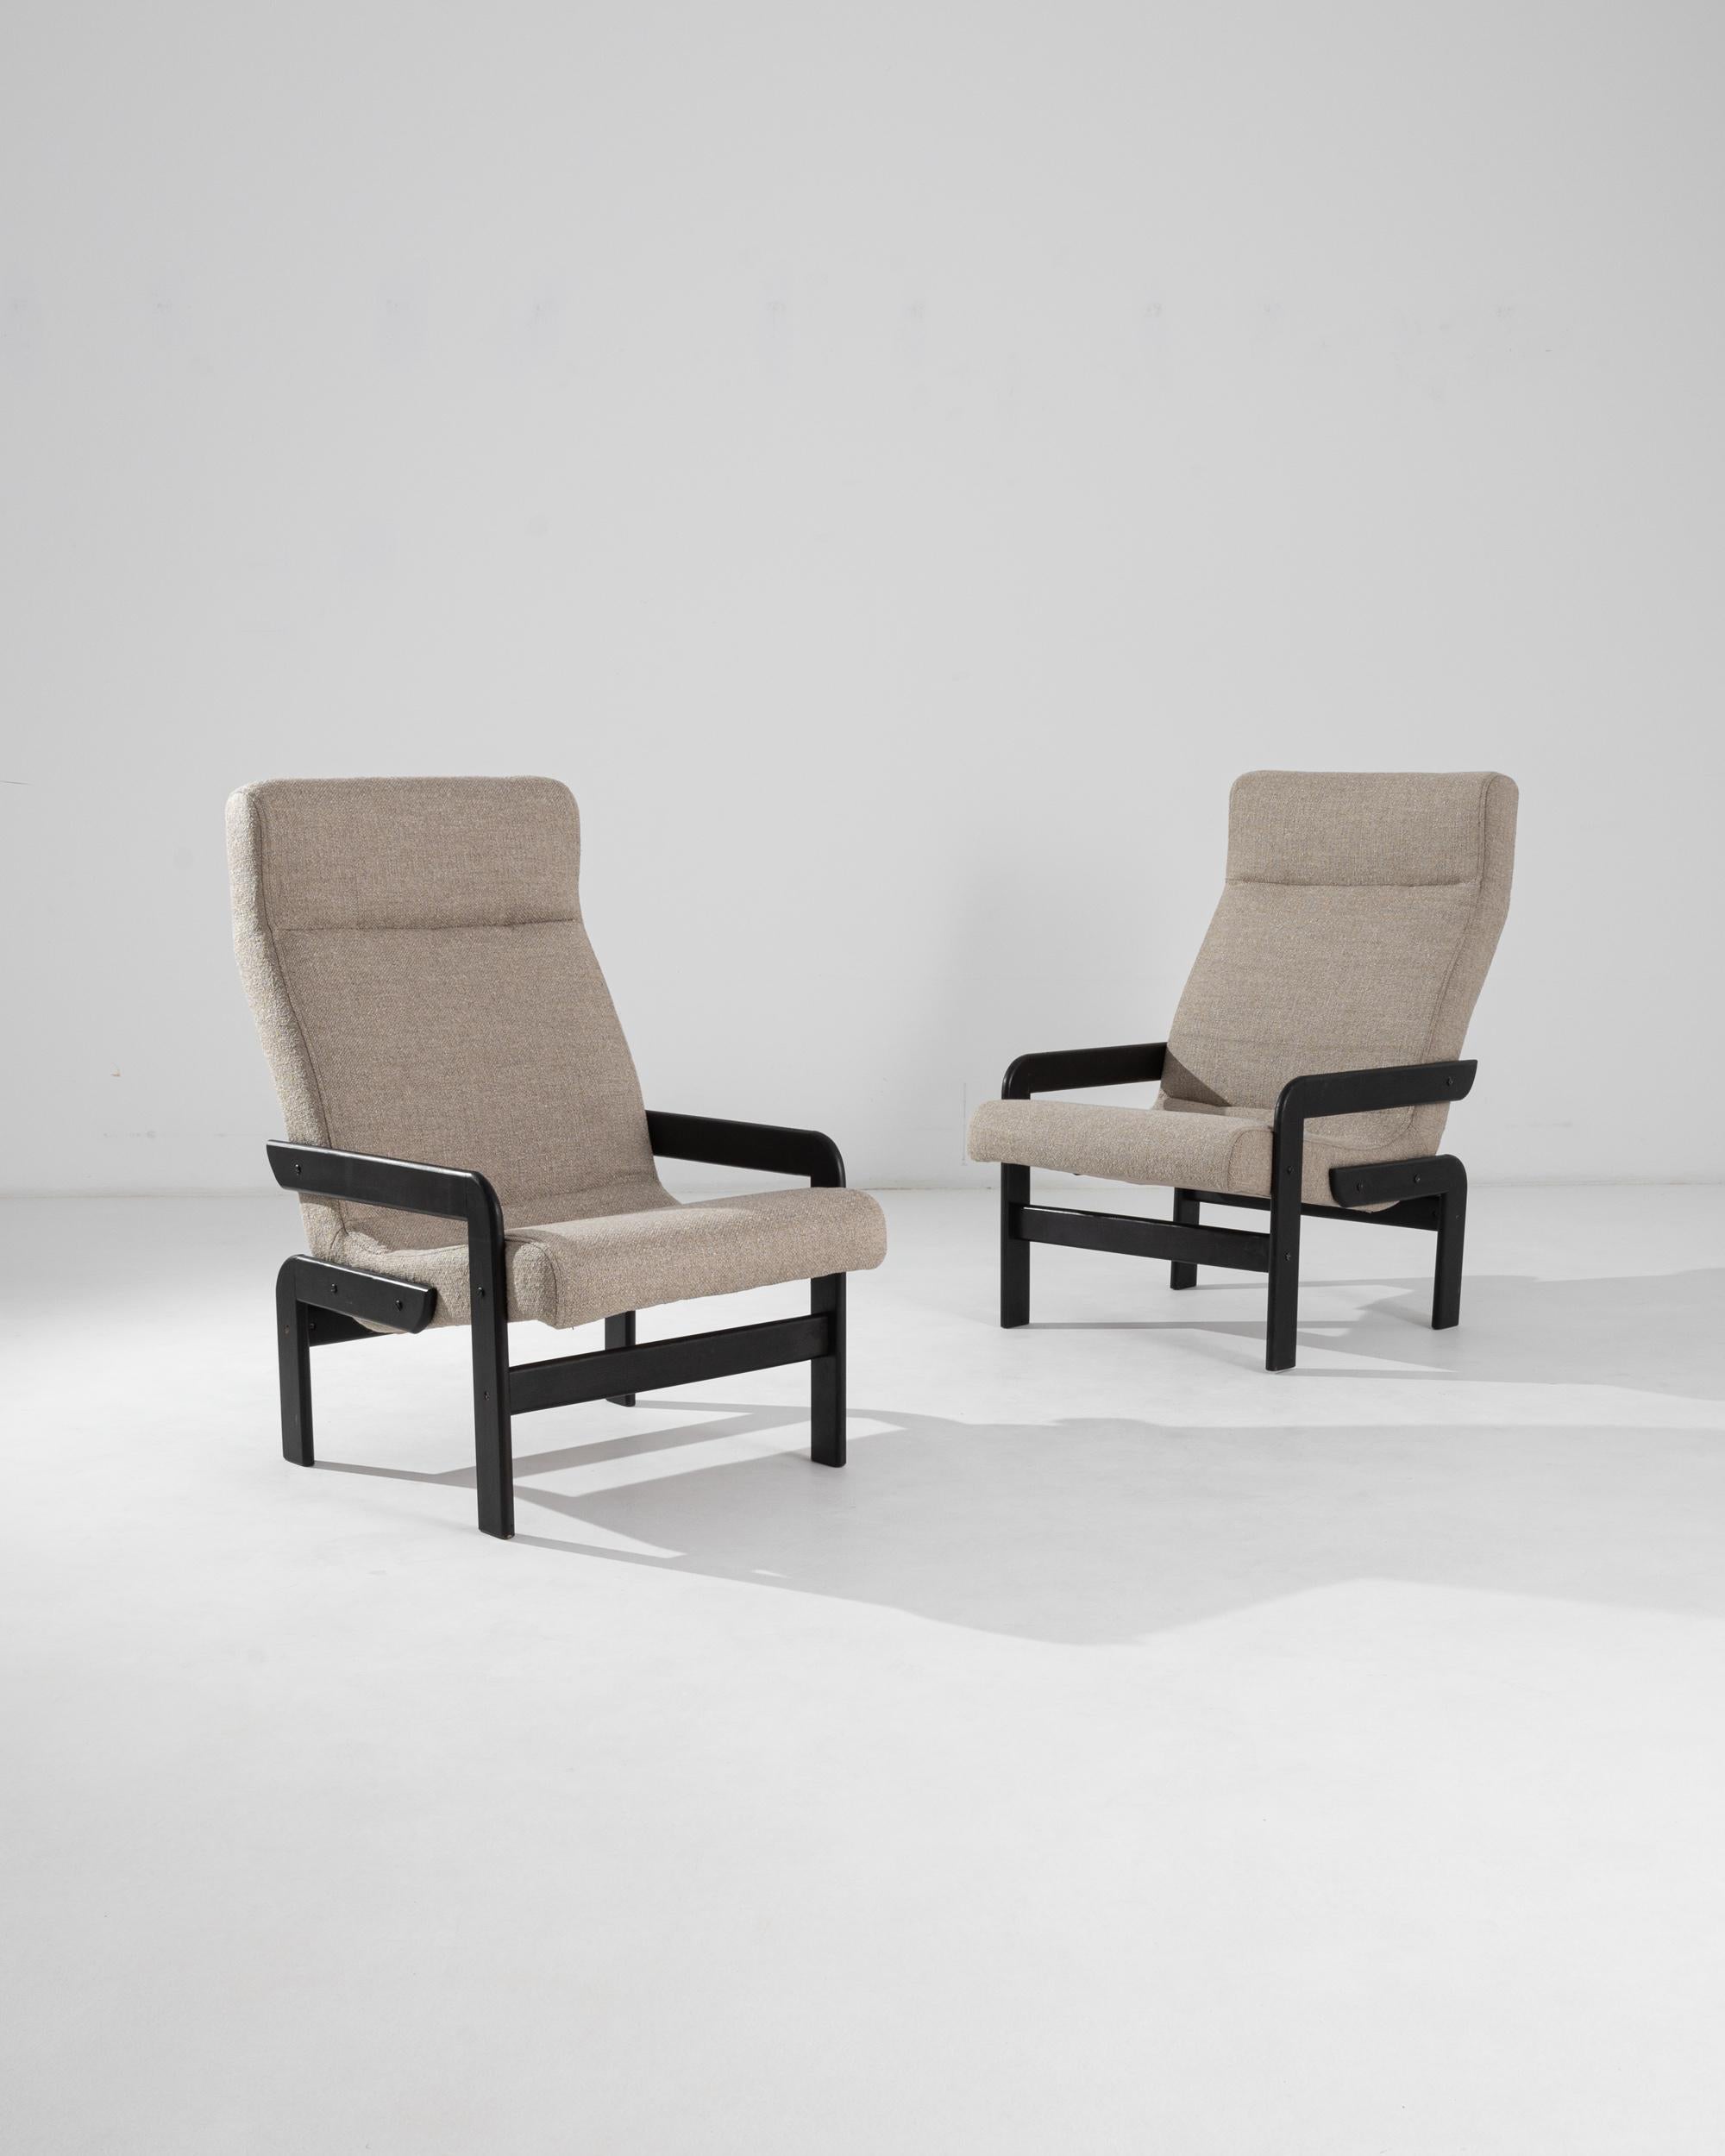 A unique silhouette in stylish black and tan gives this pair of vintage armchairs a Minimalist appeal. Made in Czechia in the 20th century, the pair allures with the perfect symmetry of their sleek lines. The chair’s arms and legs interact, but